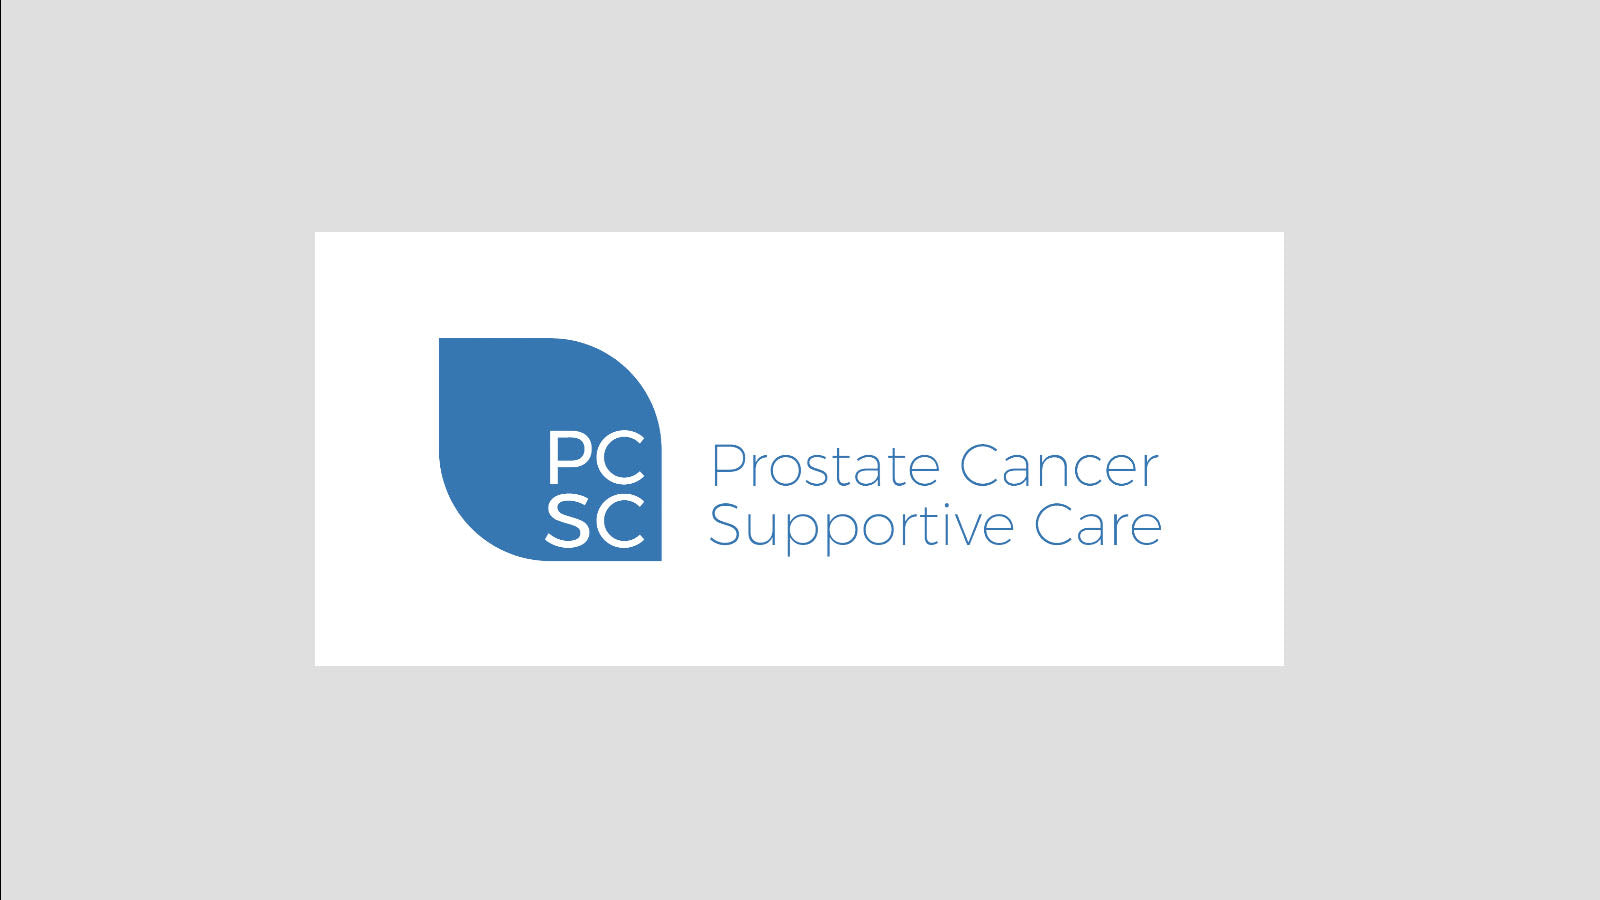 Prostate Cancer Supportive Care